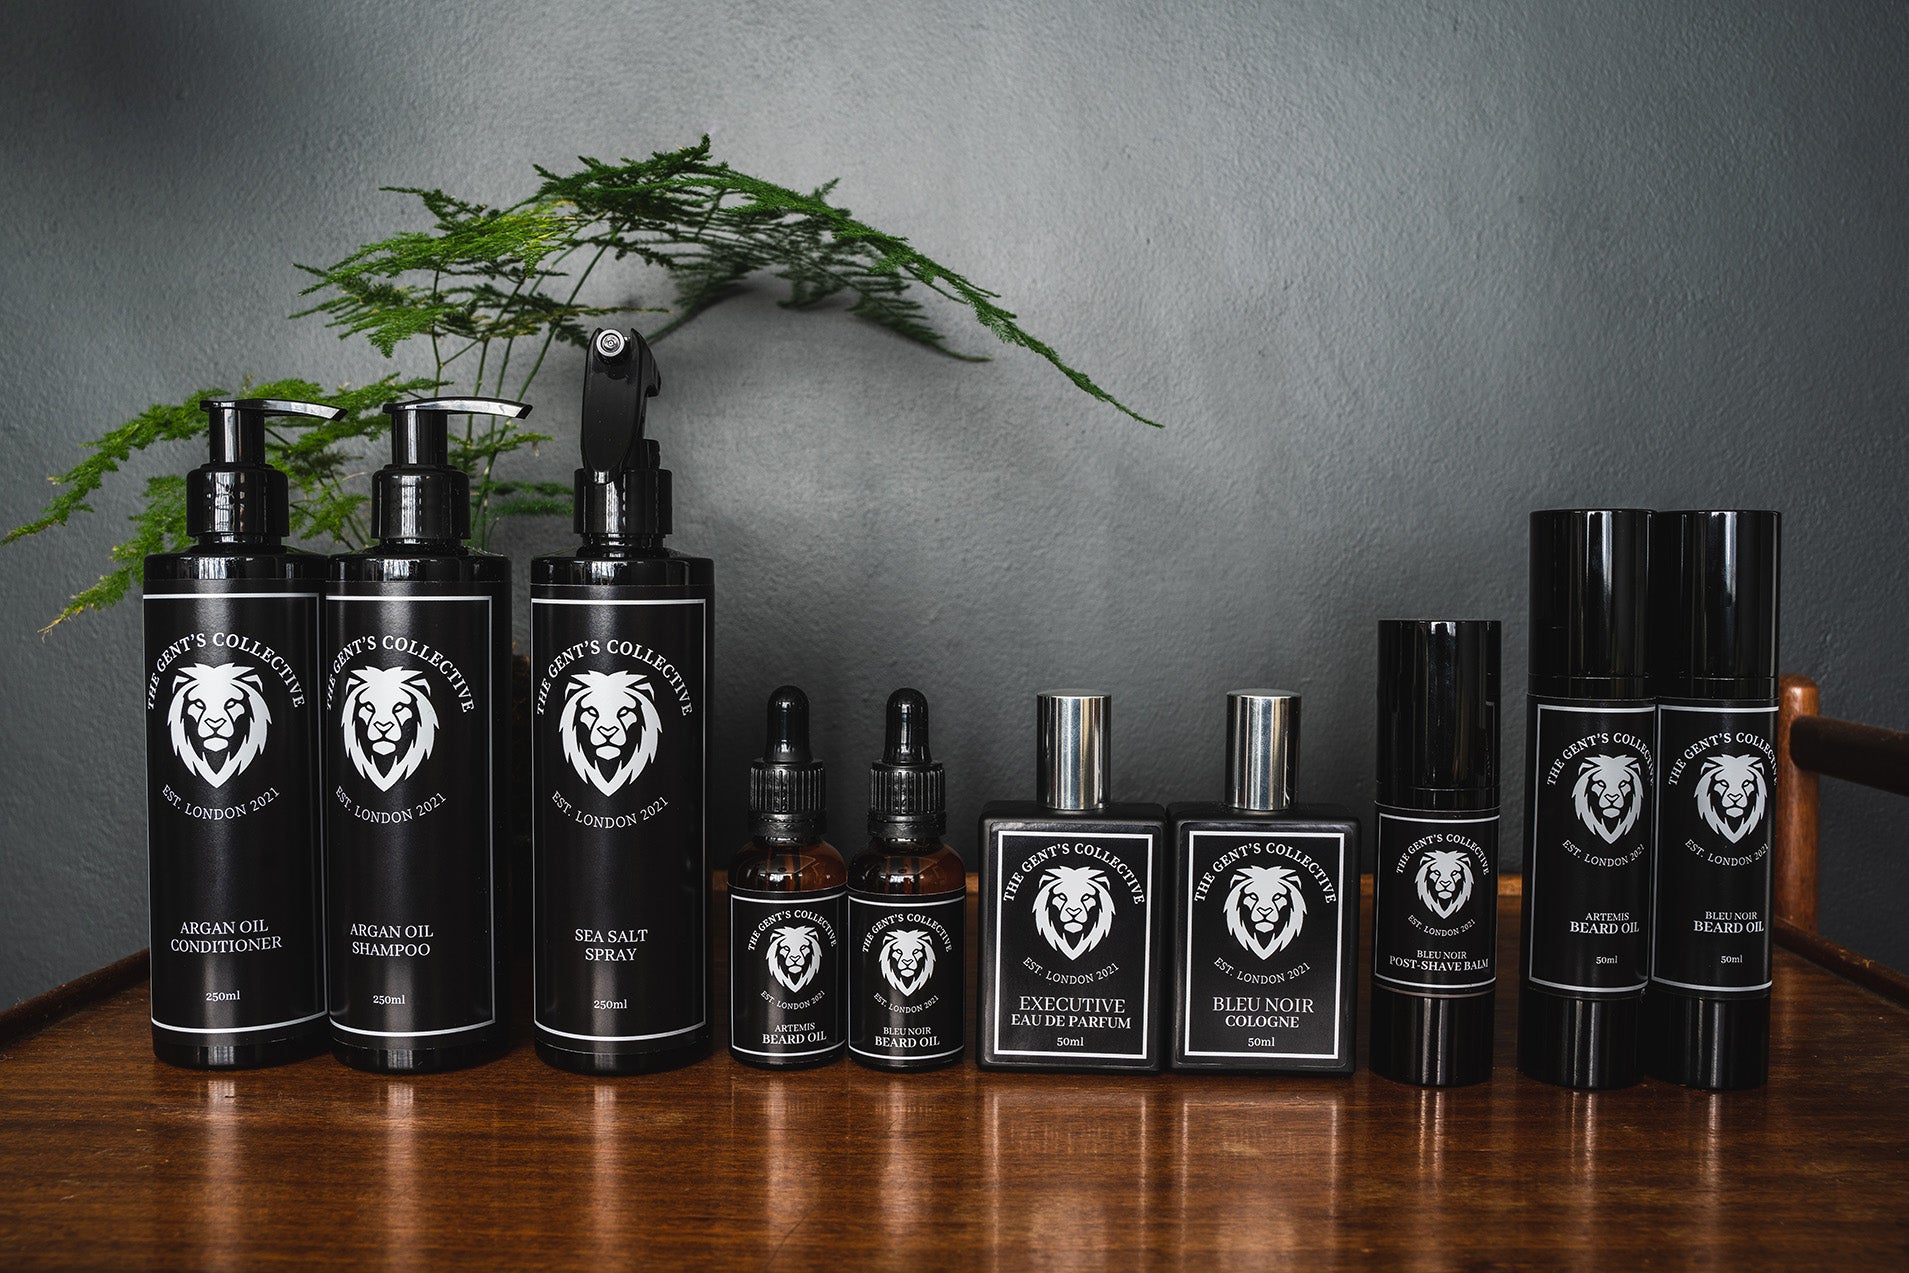 Collection of The Gent's Collective's sustainable product line: Bleu Noir and Executive Colognes 50ml, Bleu Noir and Artemis Beard Oils 30ml/50ml, Bleu Noir Post Shave Balm, Argan Oil Shampoo and Conditioner, Sea Salt Spray